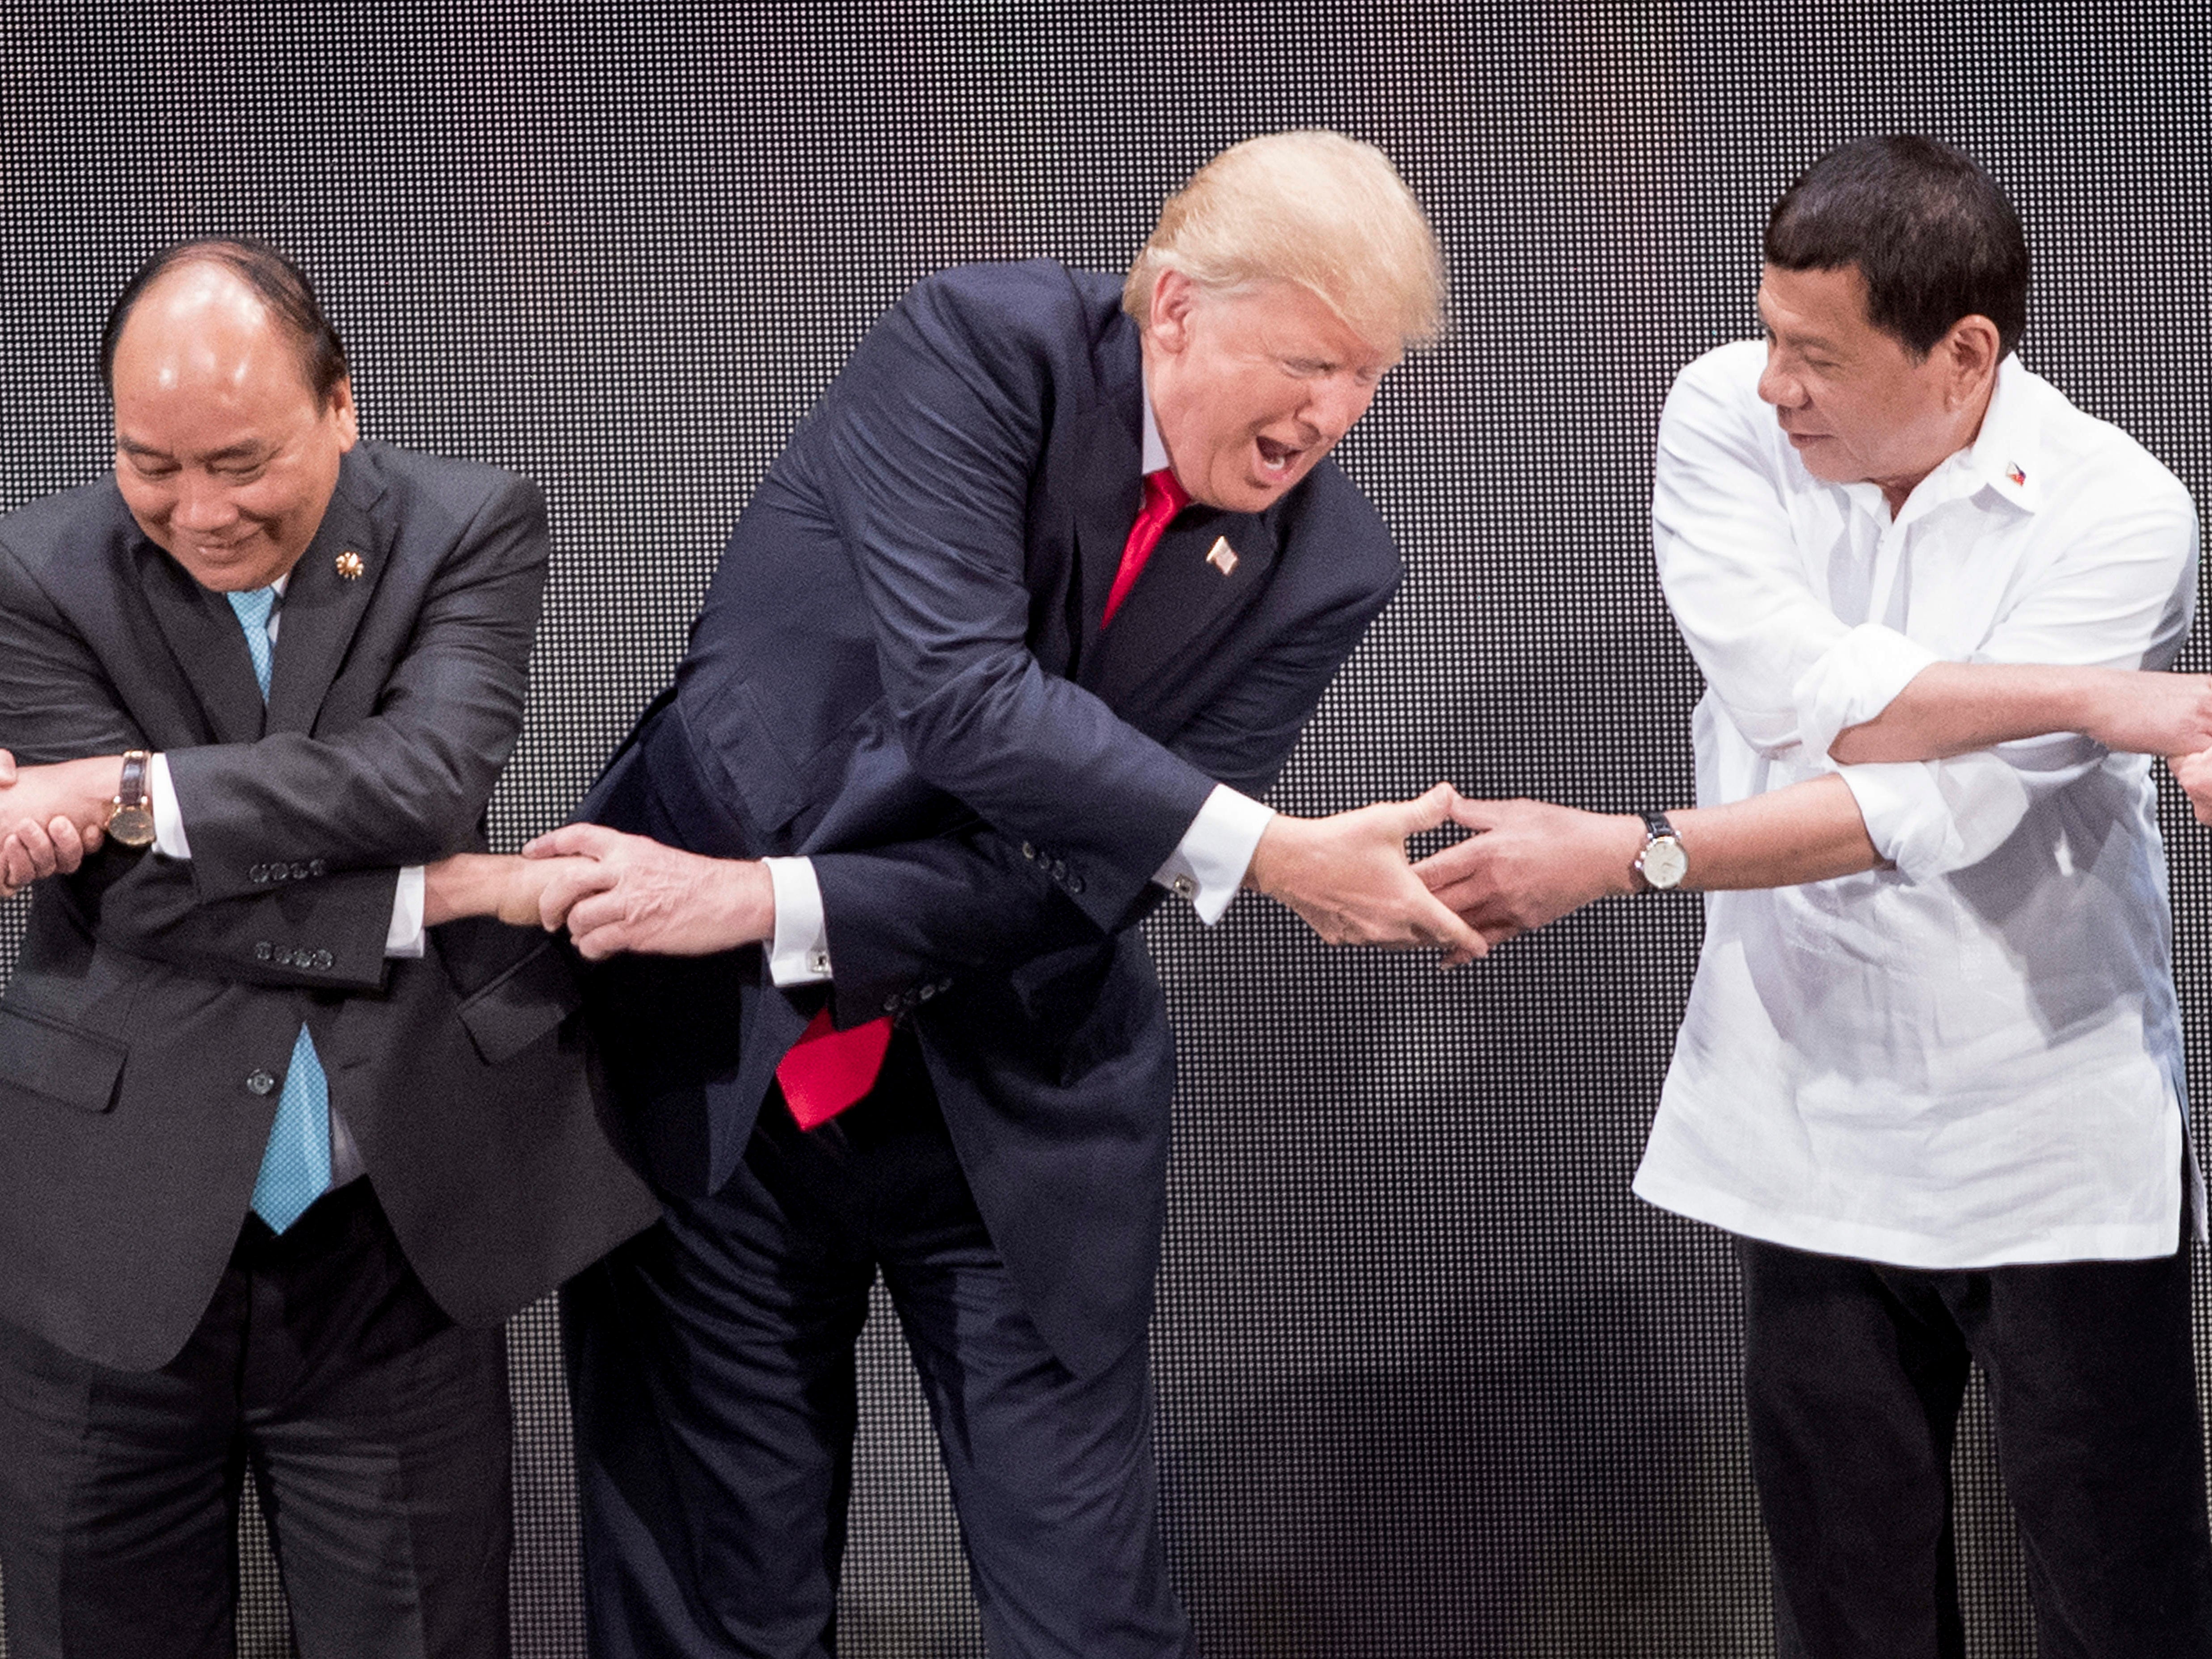 President Trump, Vietnam’s Prime Minister Nguyen Xuan Phuc and Philippine President Rodrigo Duterte join hands for the family photo during the 31st Association of South East Asian Nations, 13 November 2017